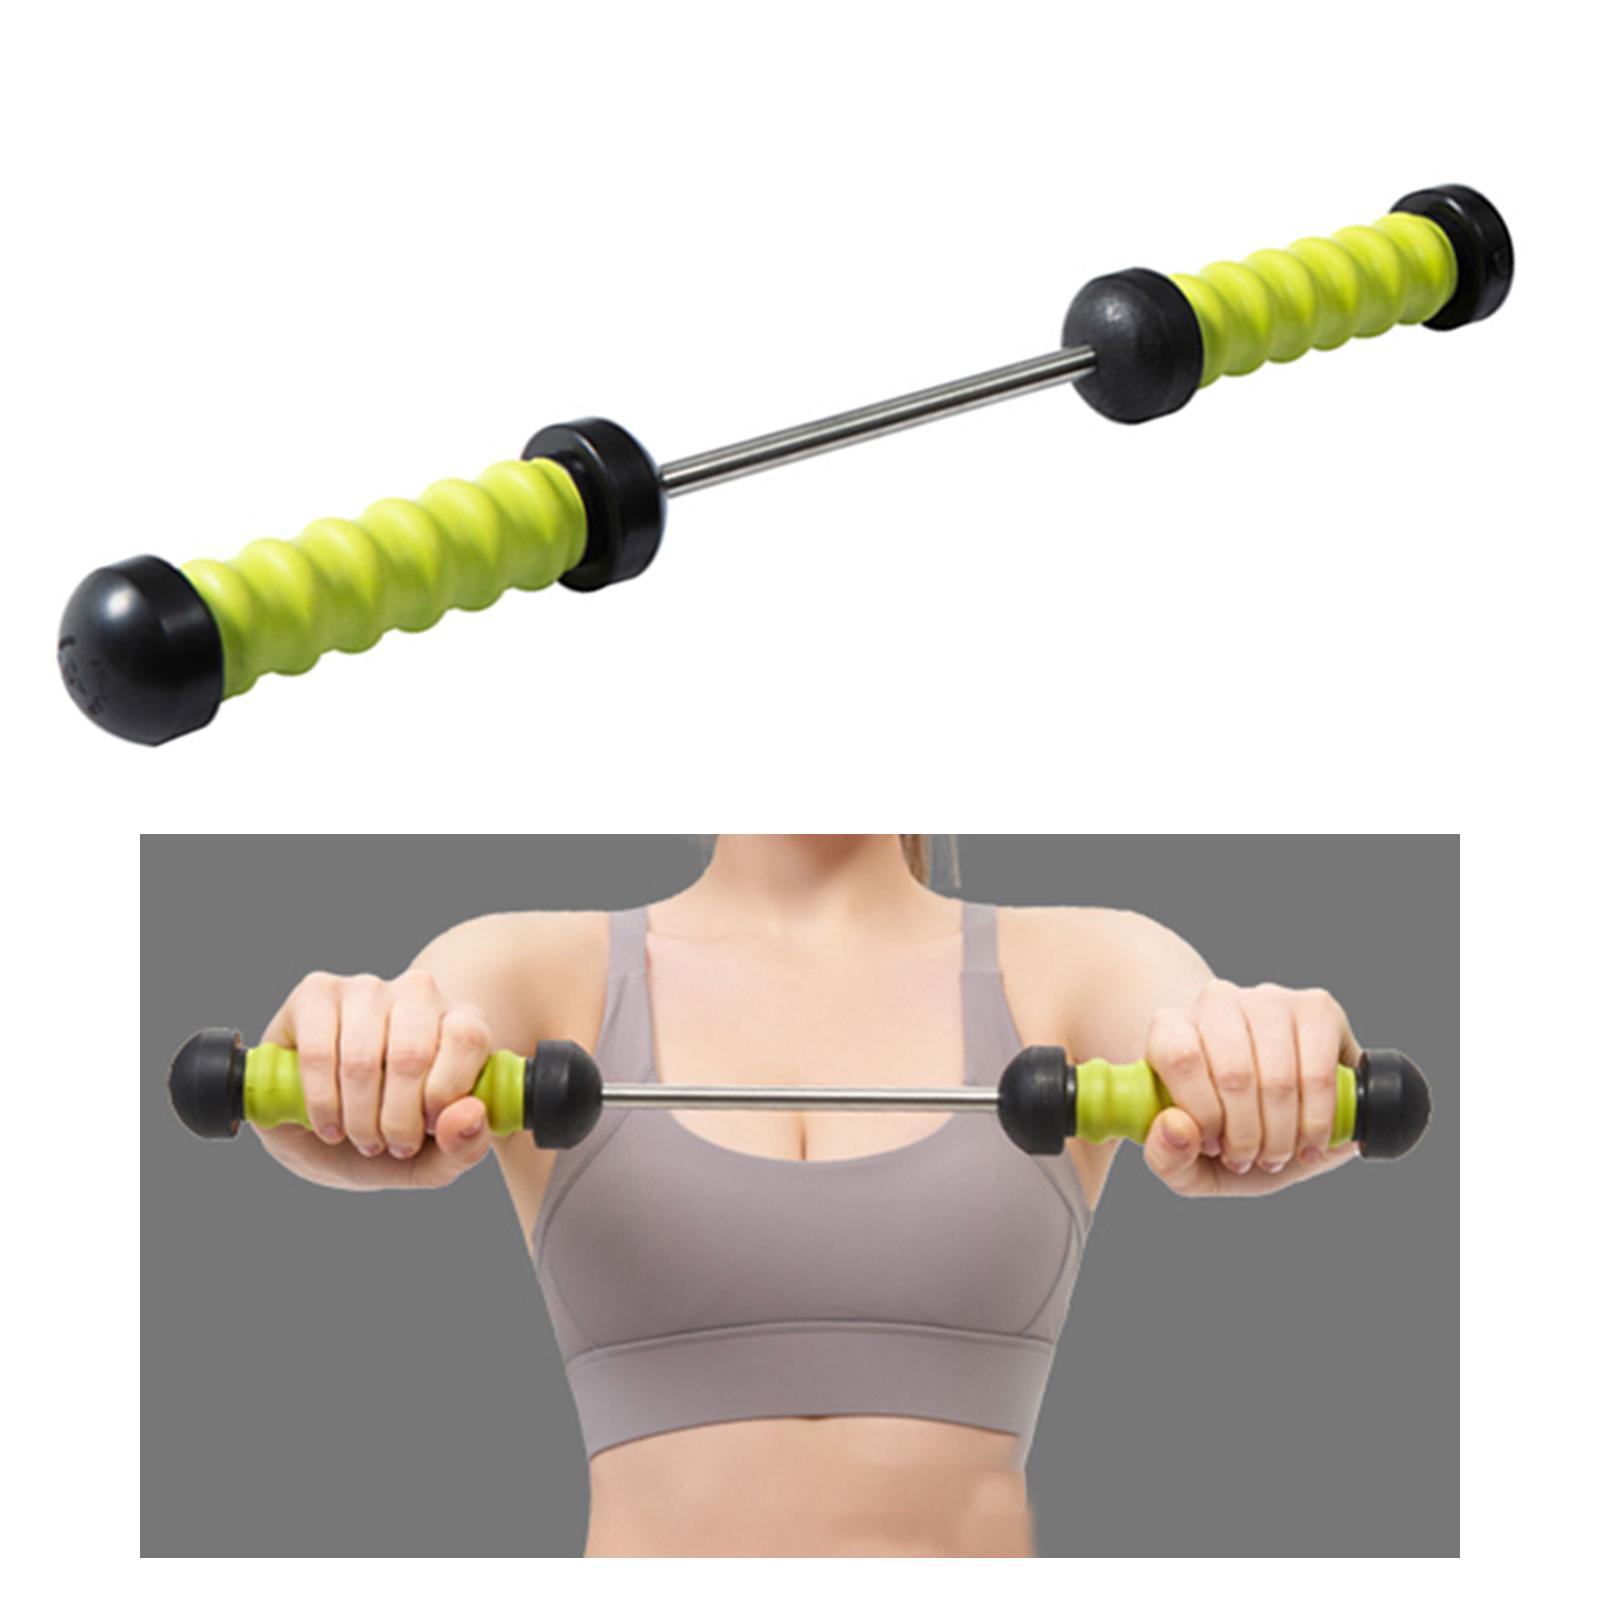 Arm Power Exerciser Home Gym Women Men Resistance Exercise System Bands